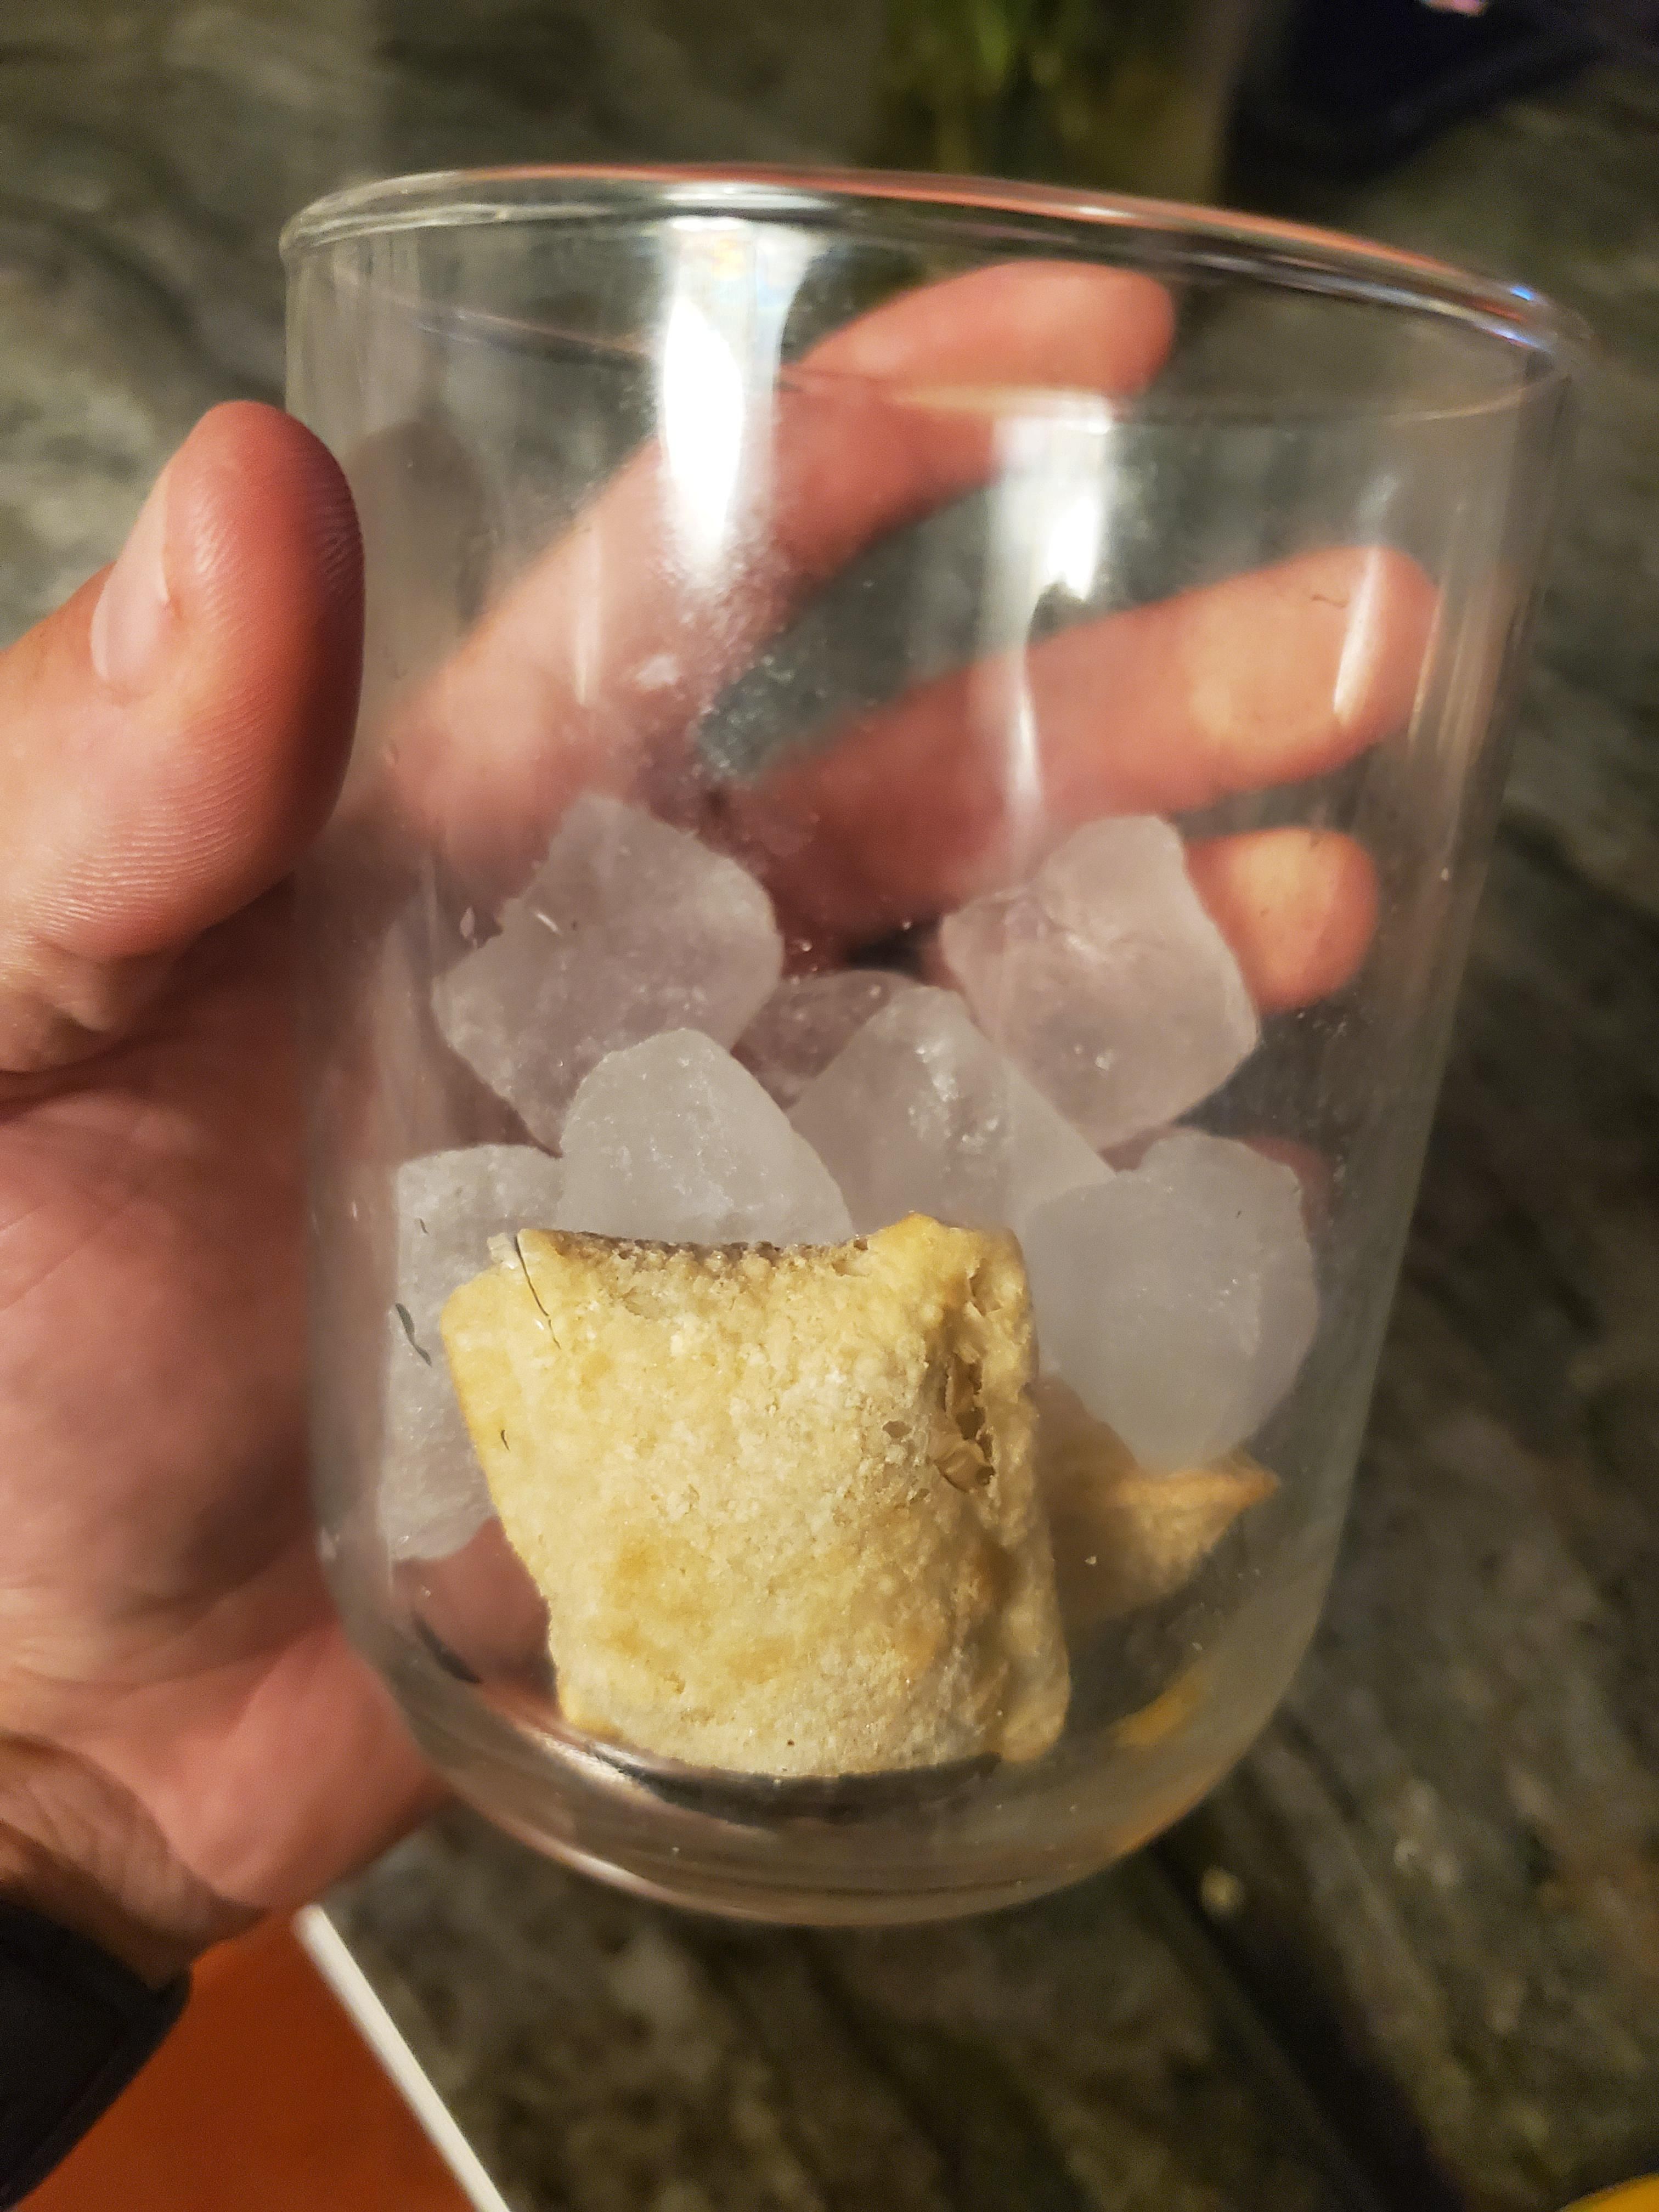 I was about to pour myself a drink and realized 2 of my ice cubes were actually pizza rolls. Maybe I don't need that drink after all.